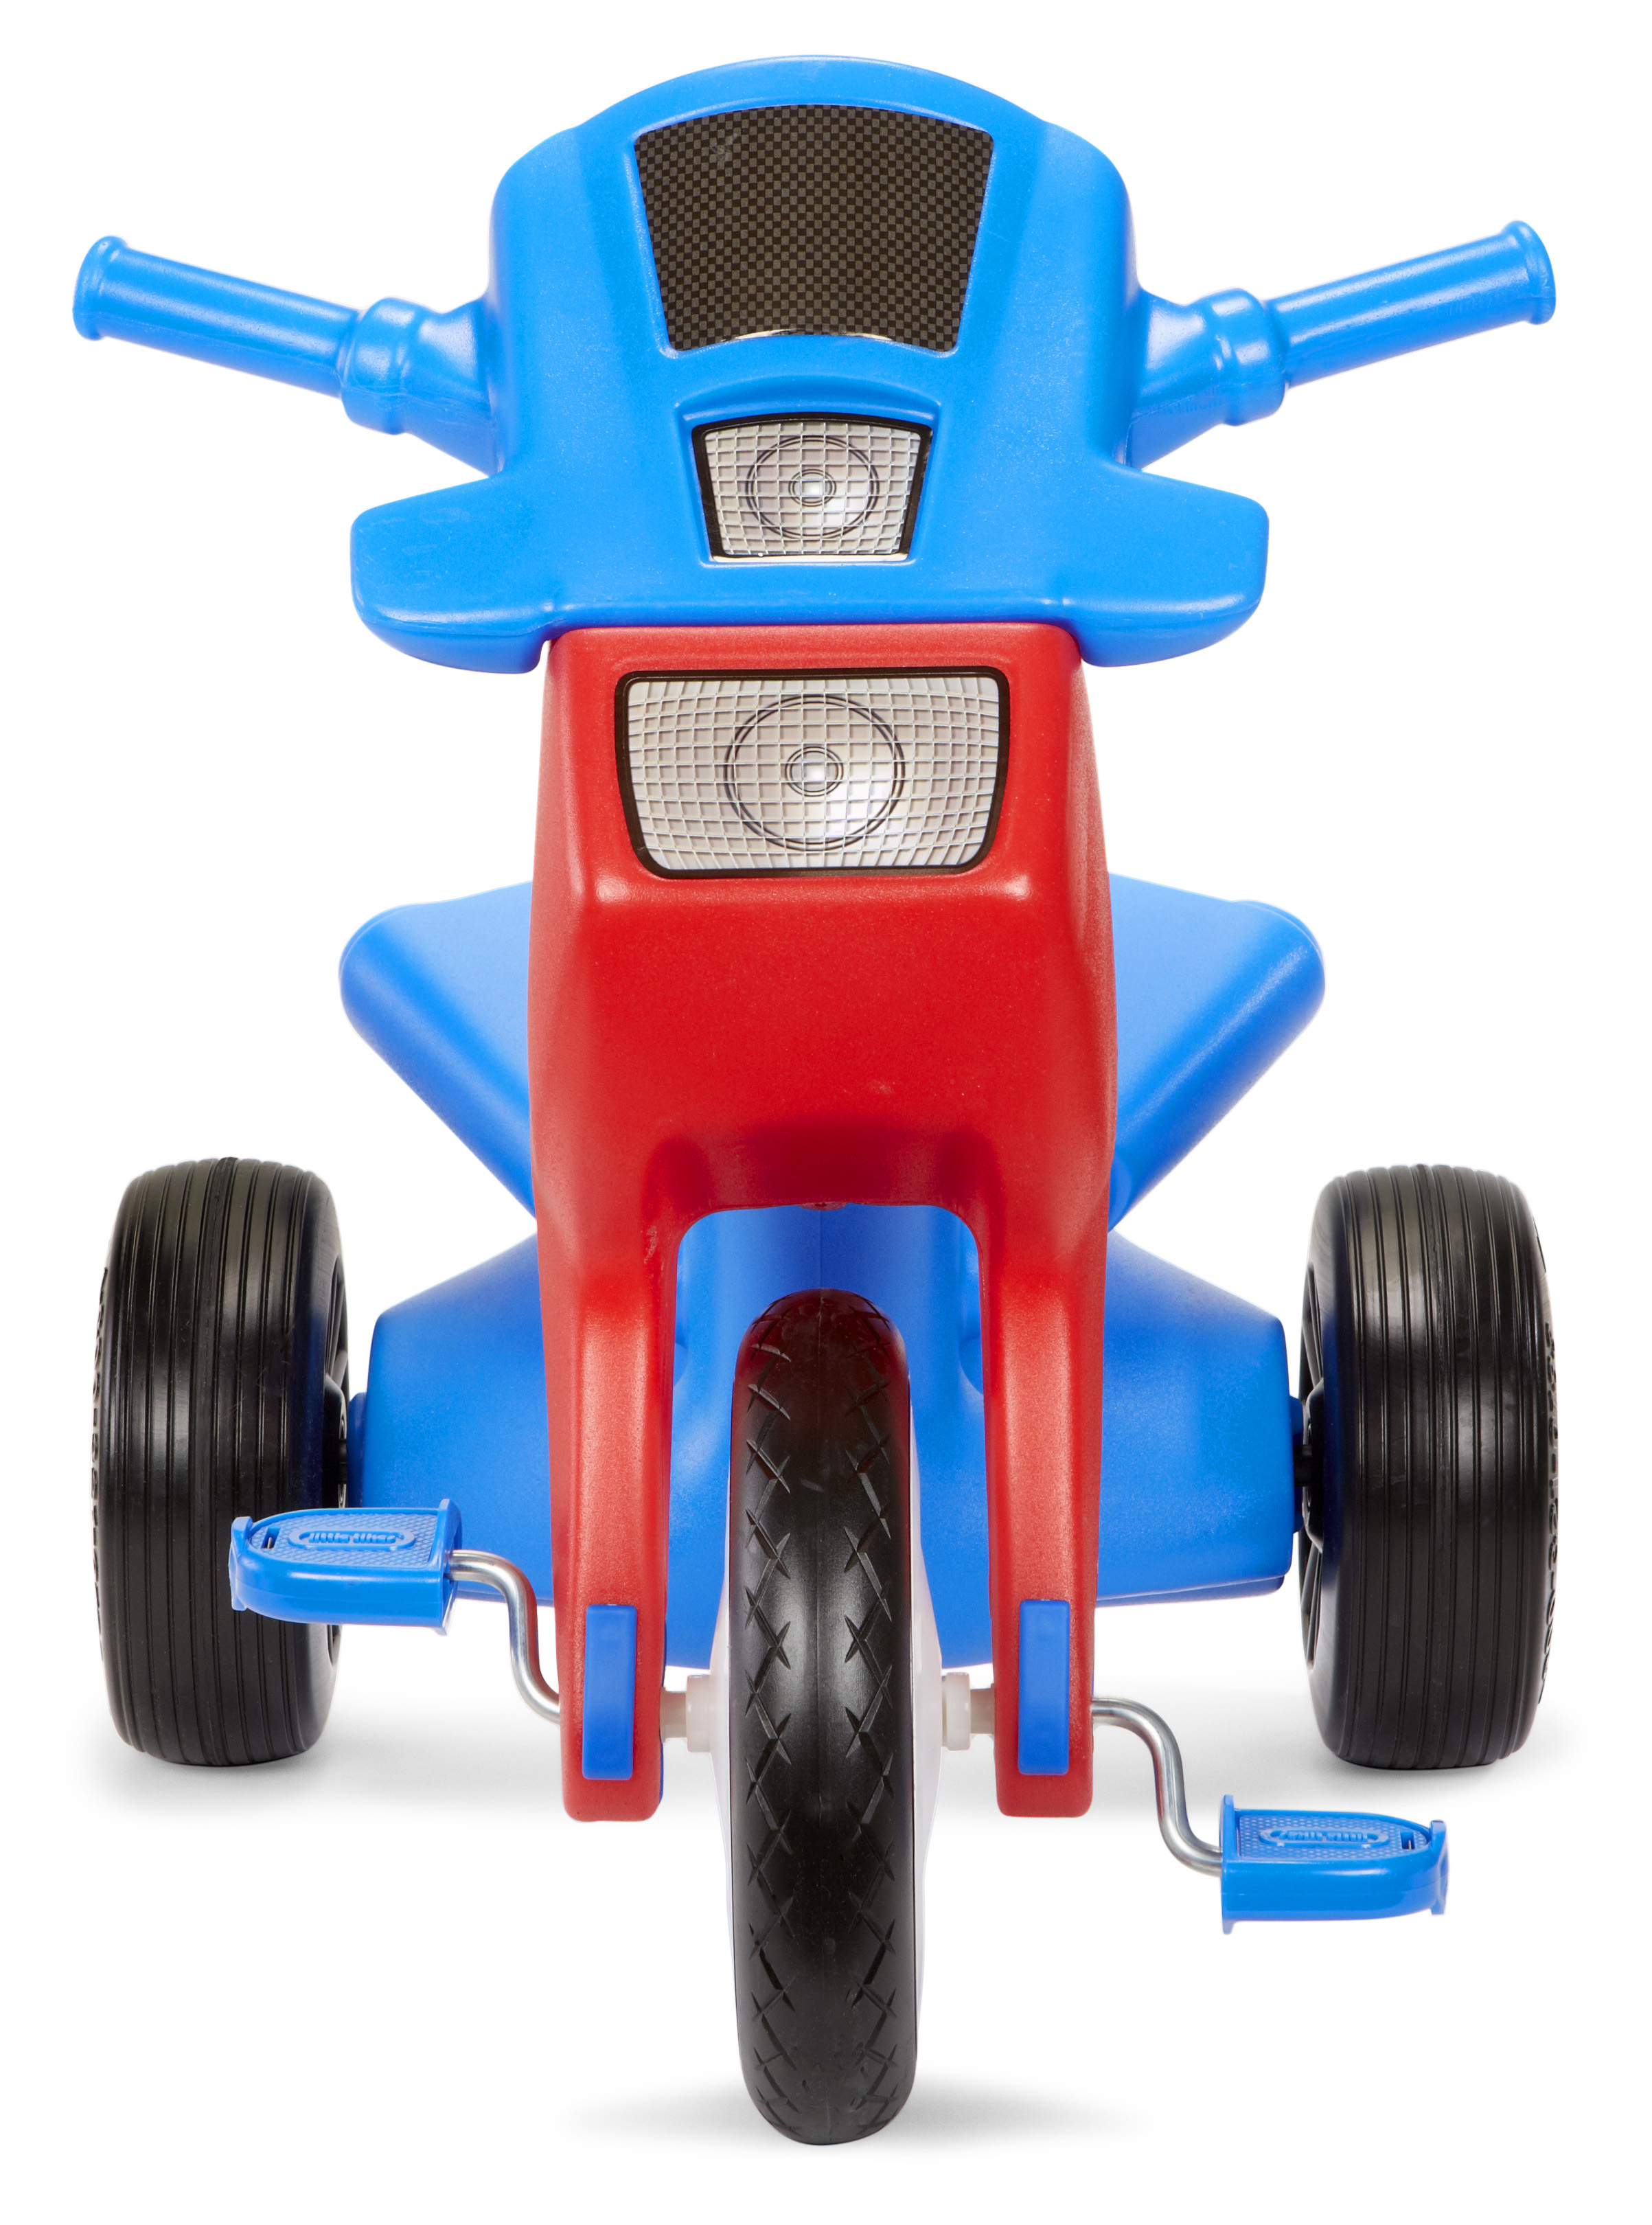 Little Tikes Classic Sport Cycle Pedal Ride On Trike - image 4 of 7